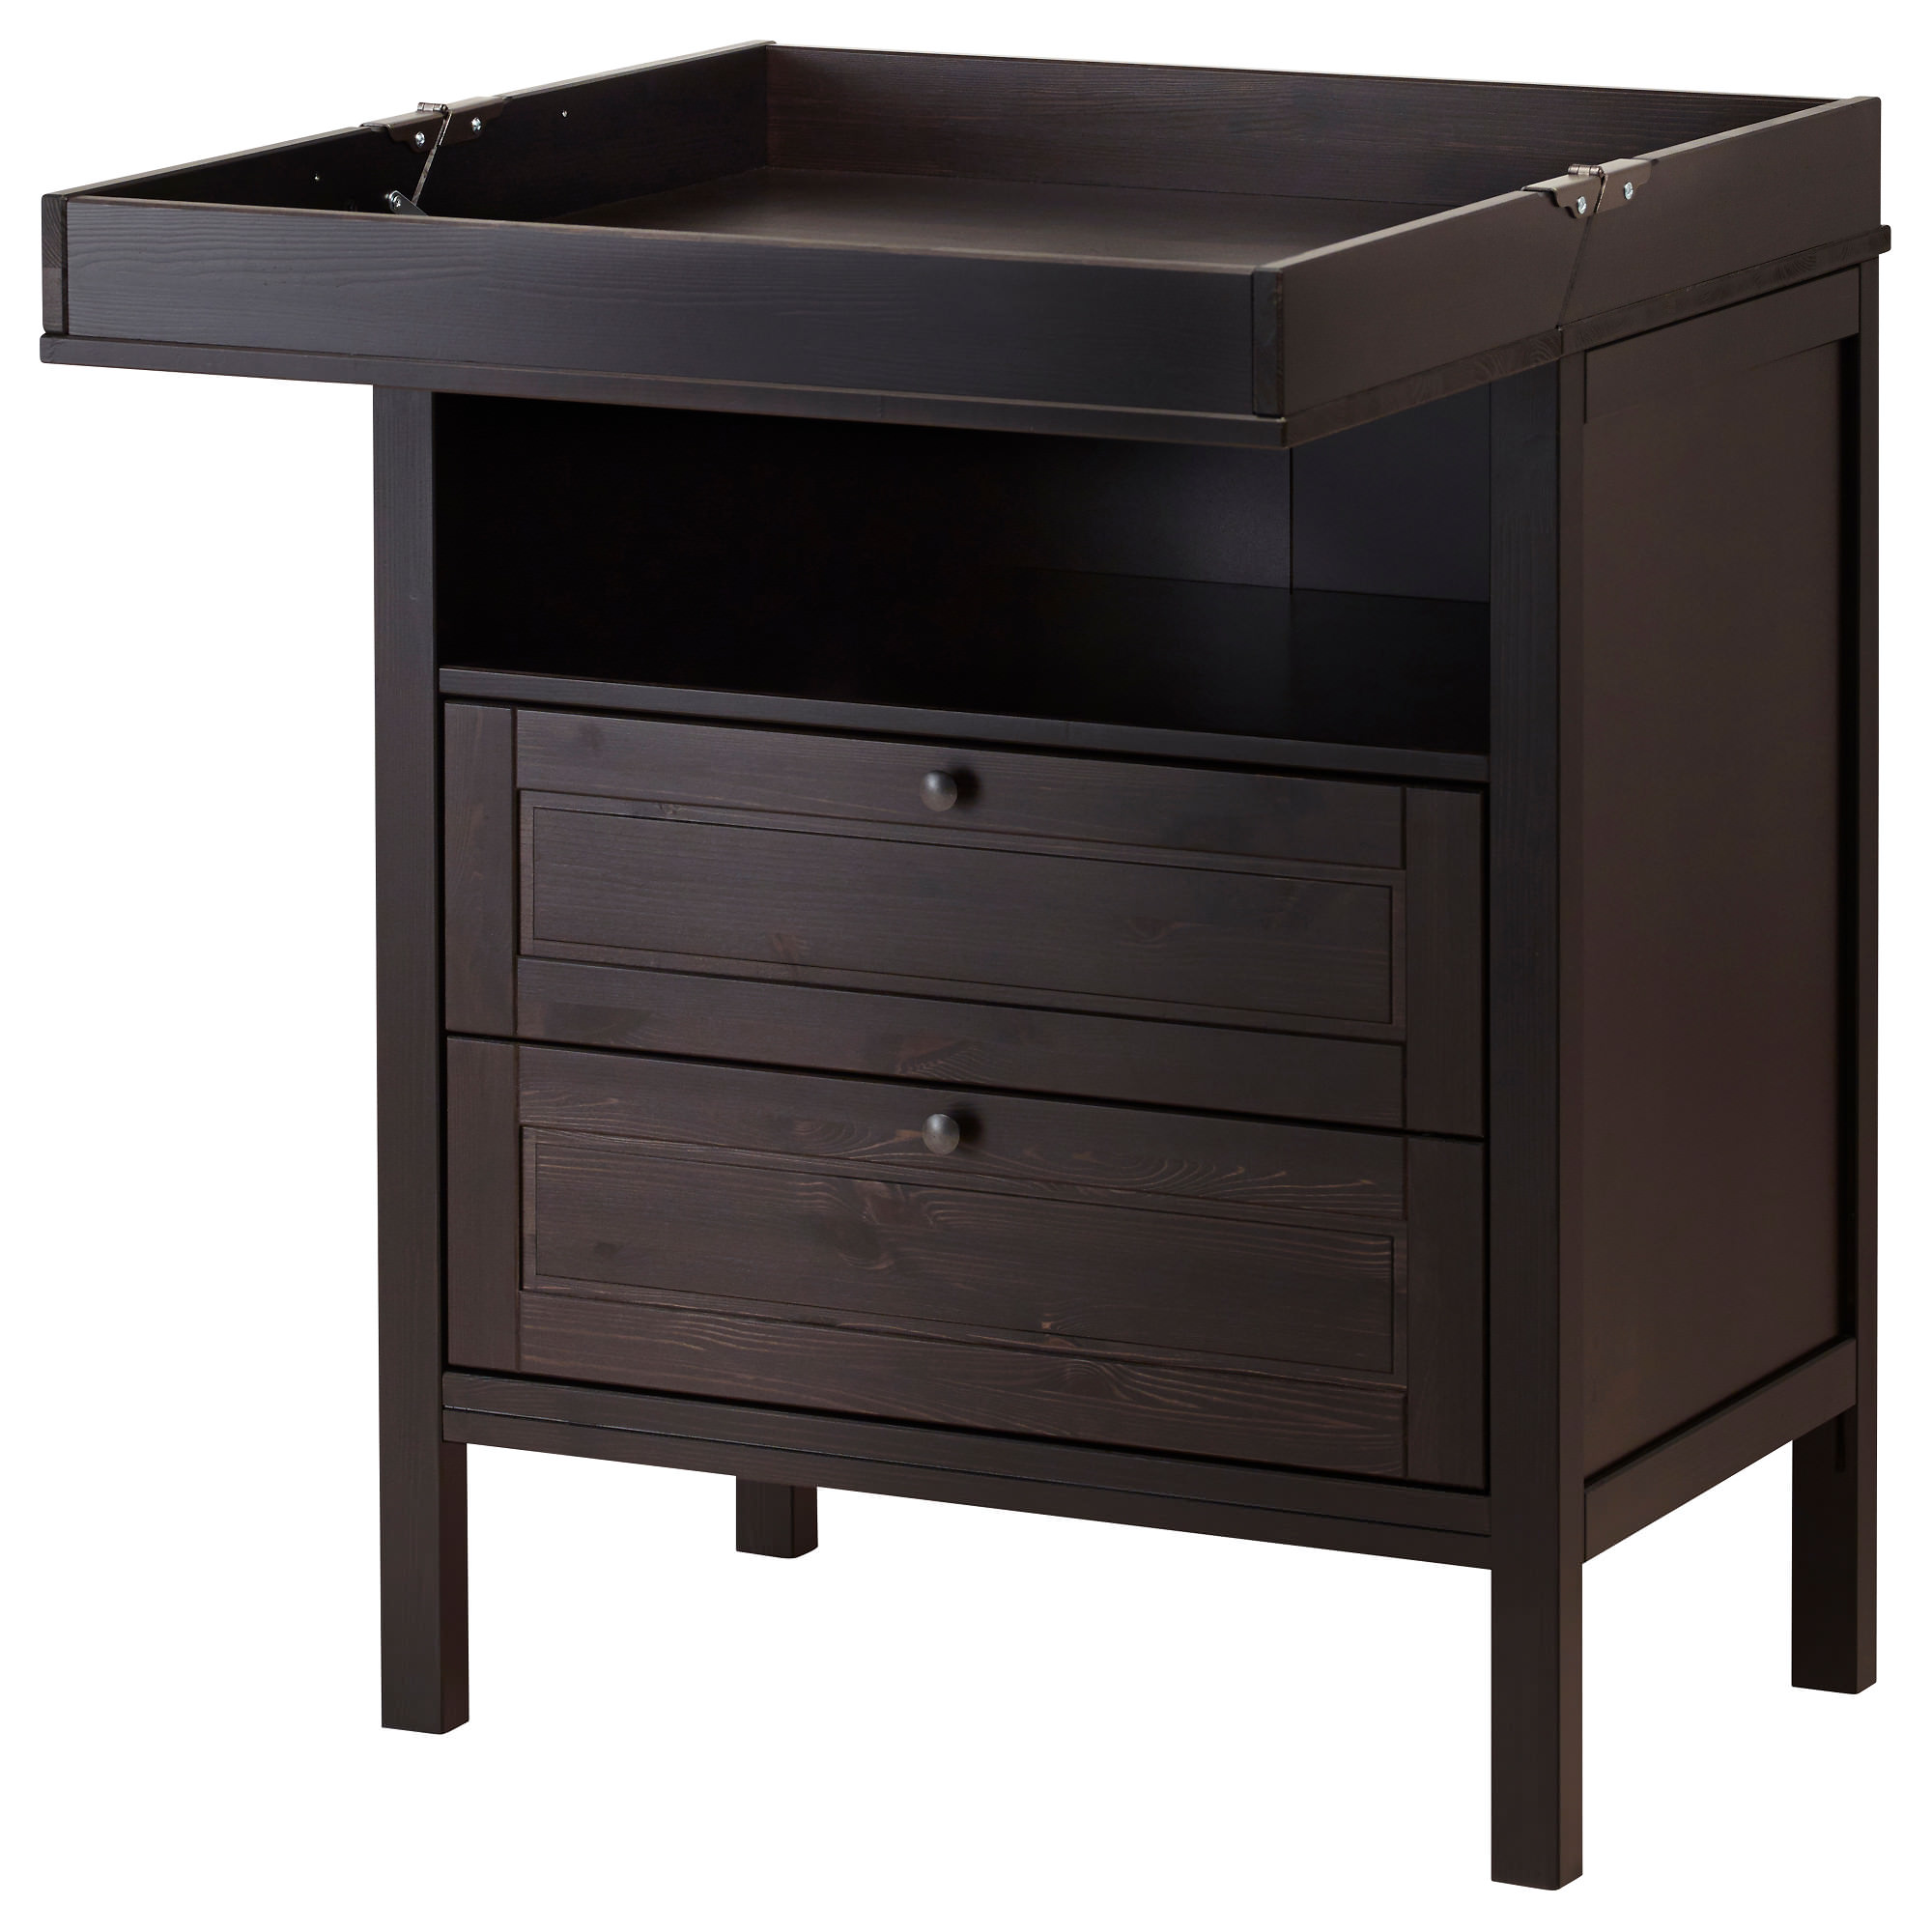 IKEA Changing Table Dresser